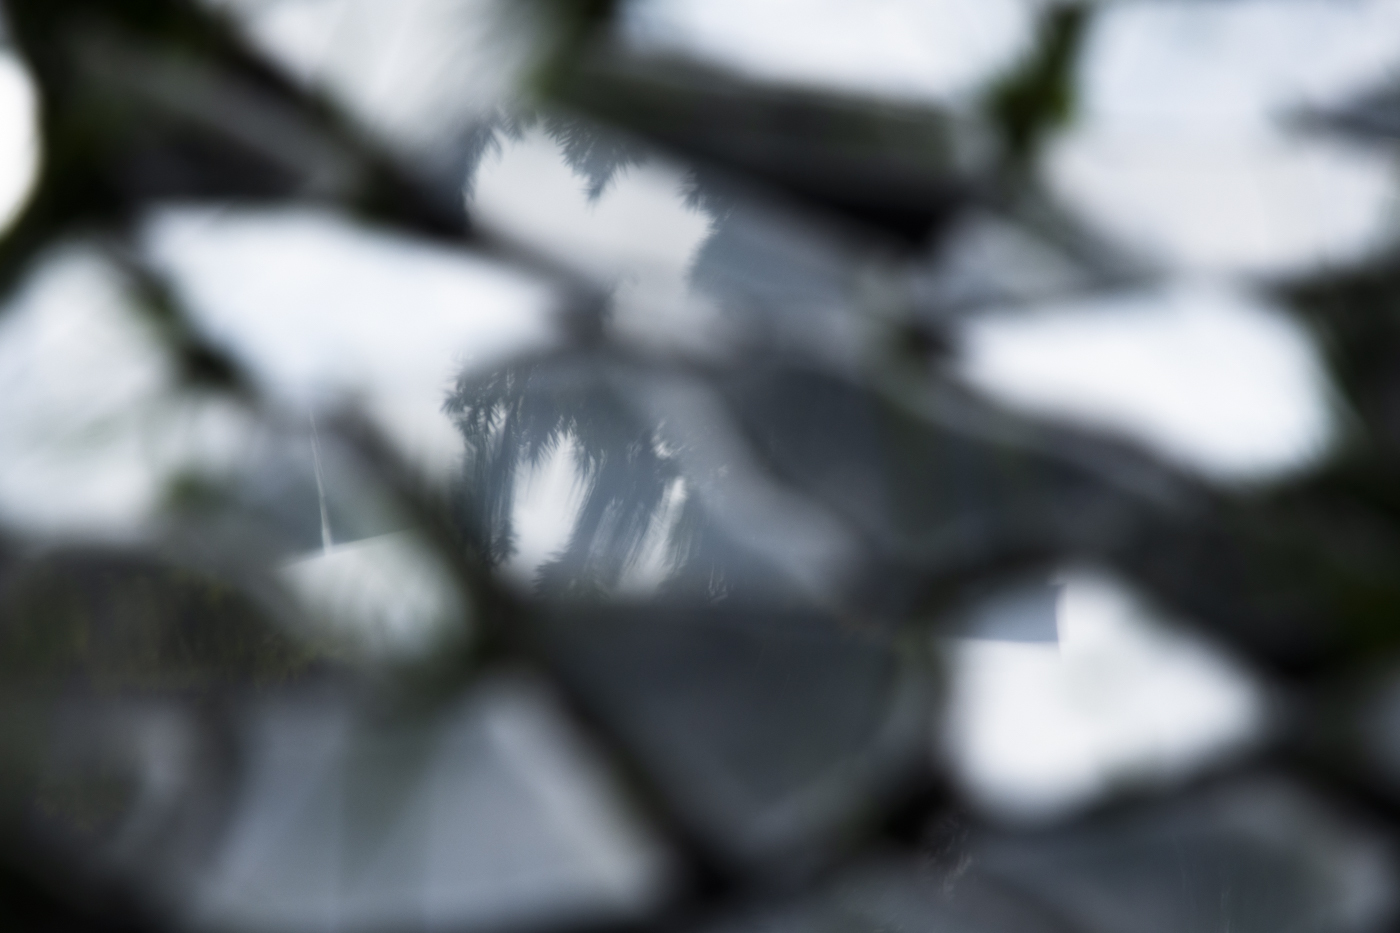 a close-up image of a fractured mirror sitting in grass.